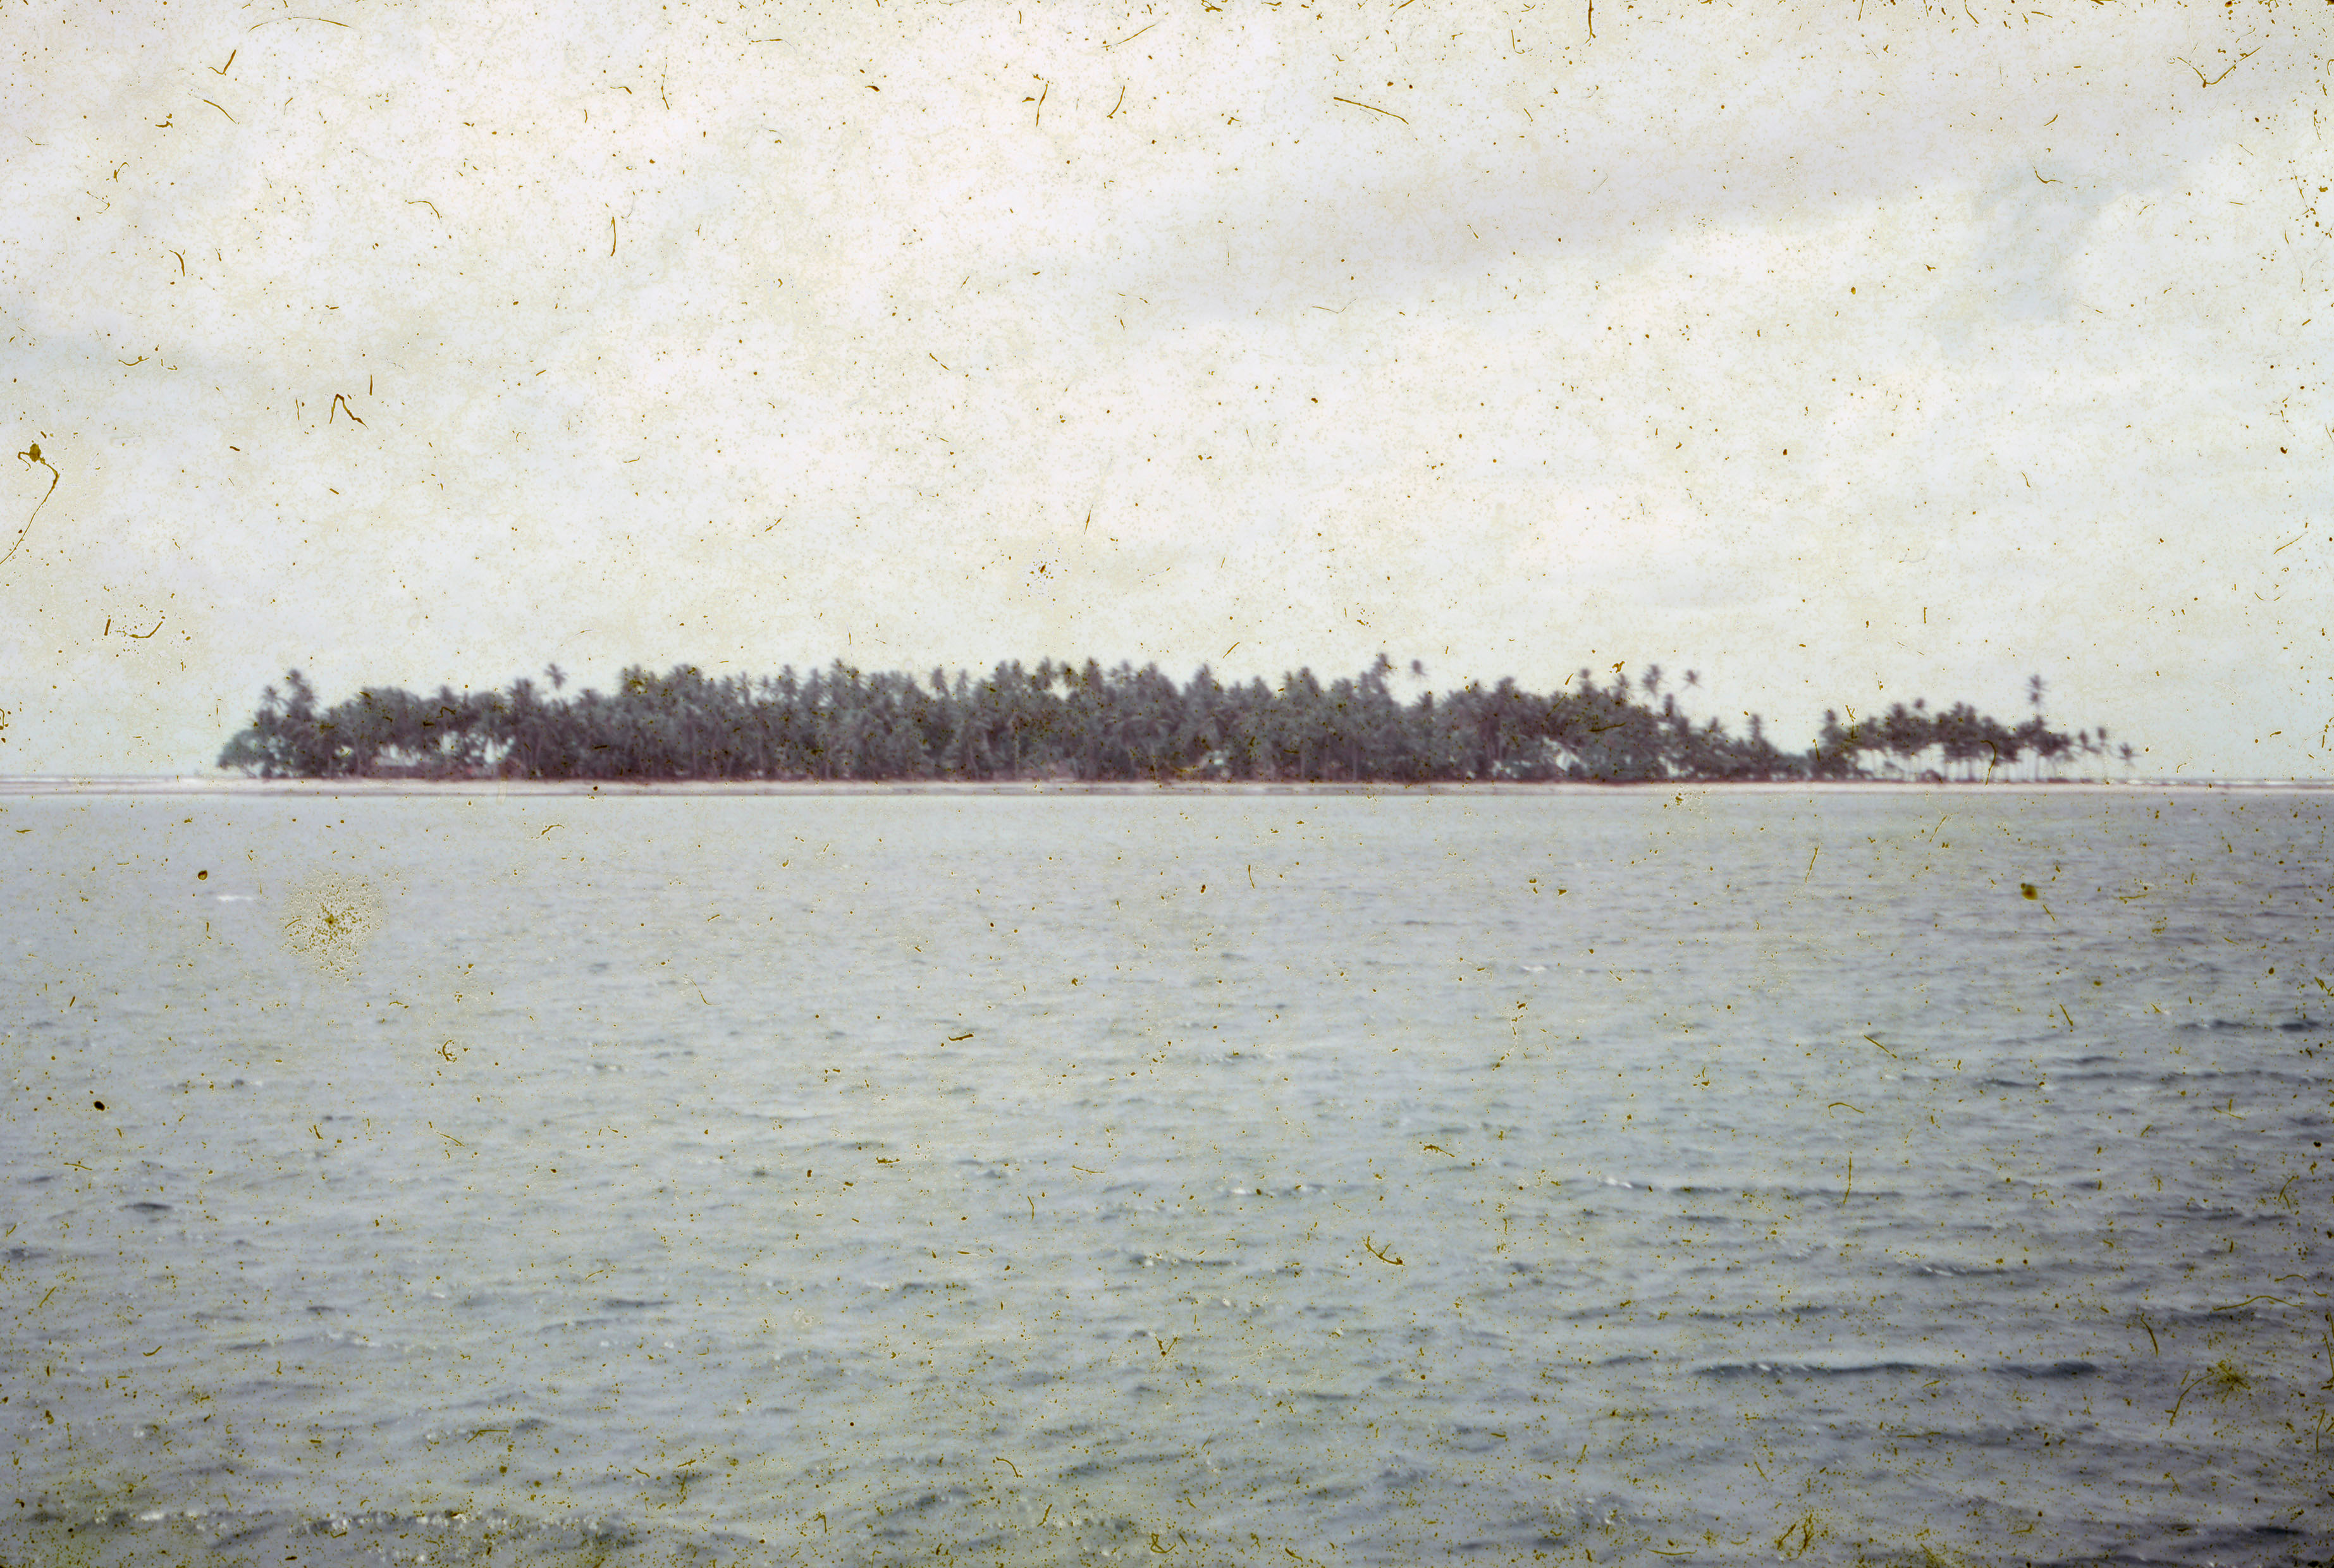 Aged photograph of an island taken at a distance.